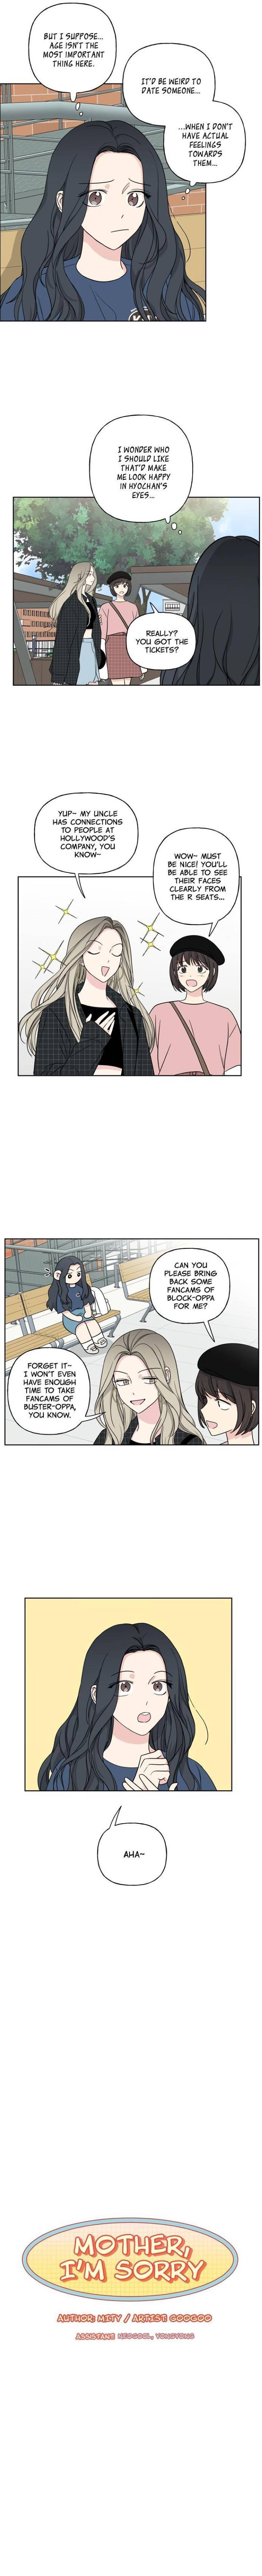 mother-im-sorry-chap-20-1